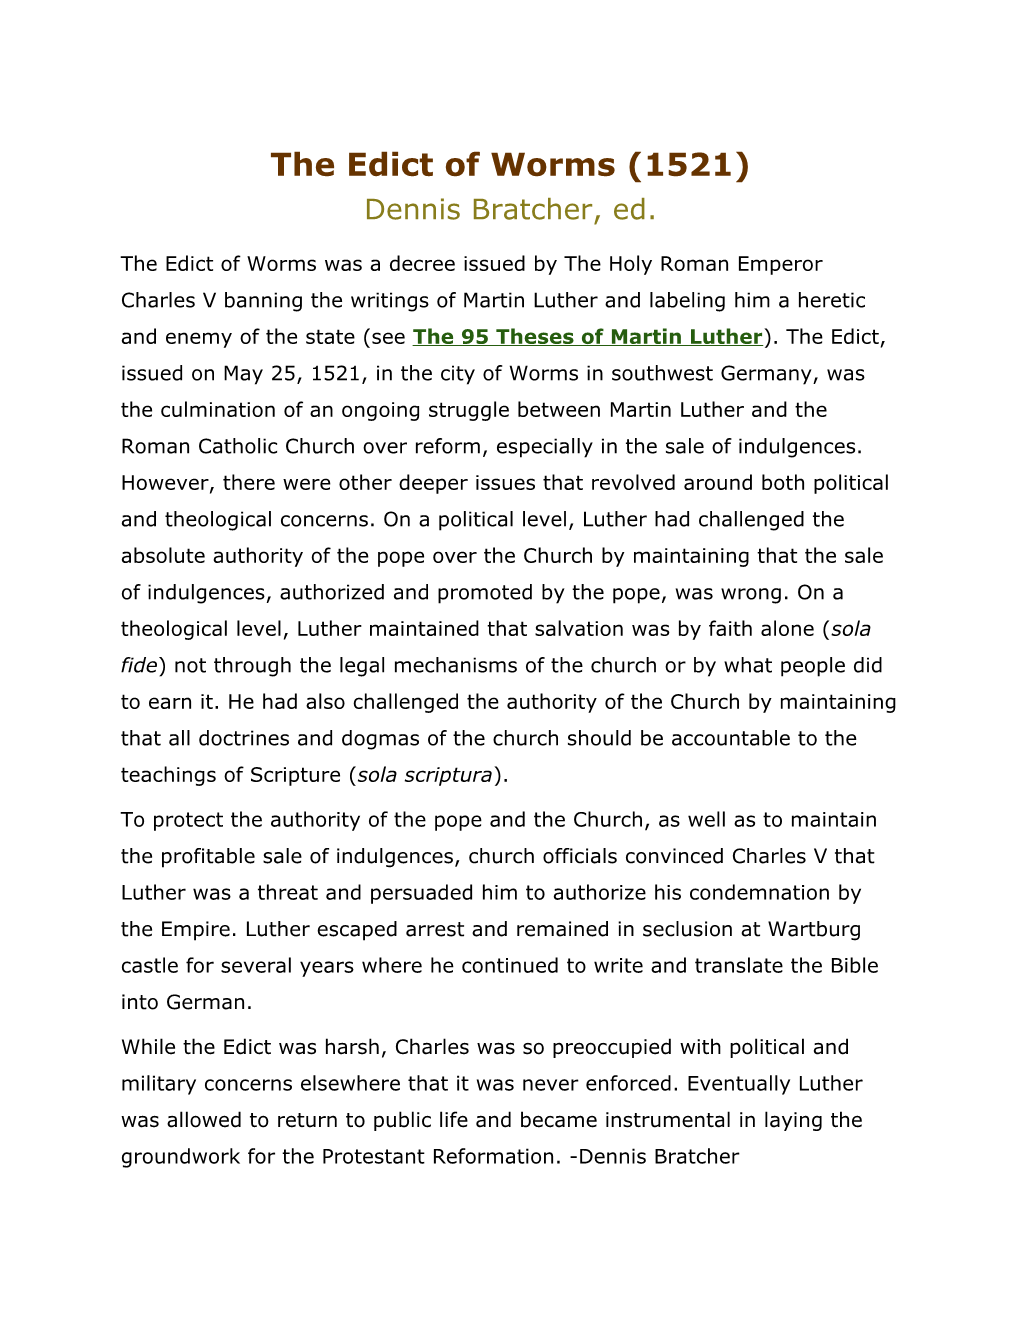 The Edict of Worms (1521)